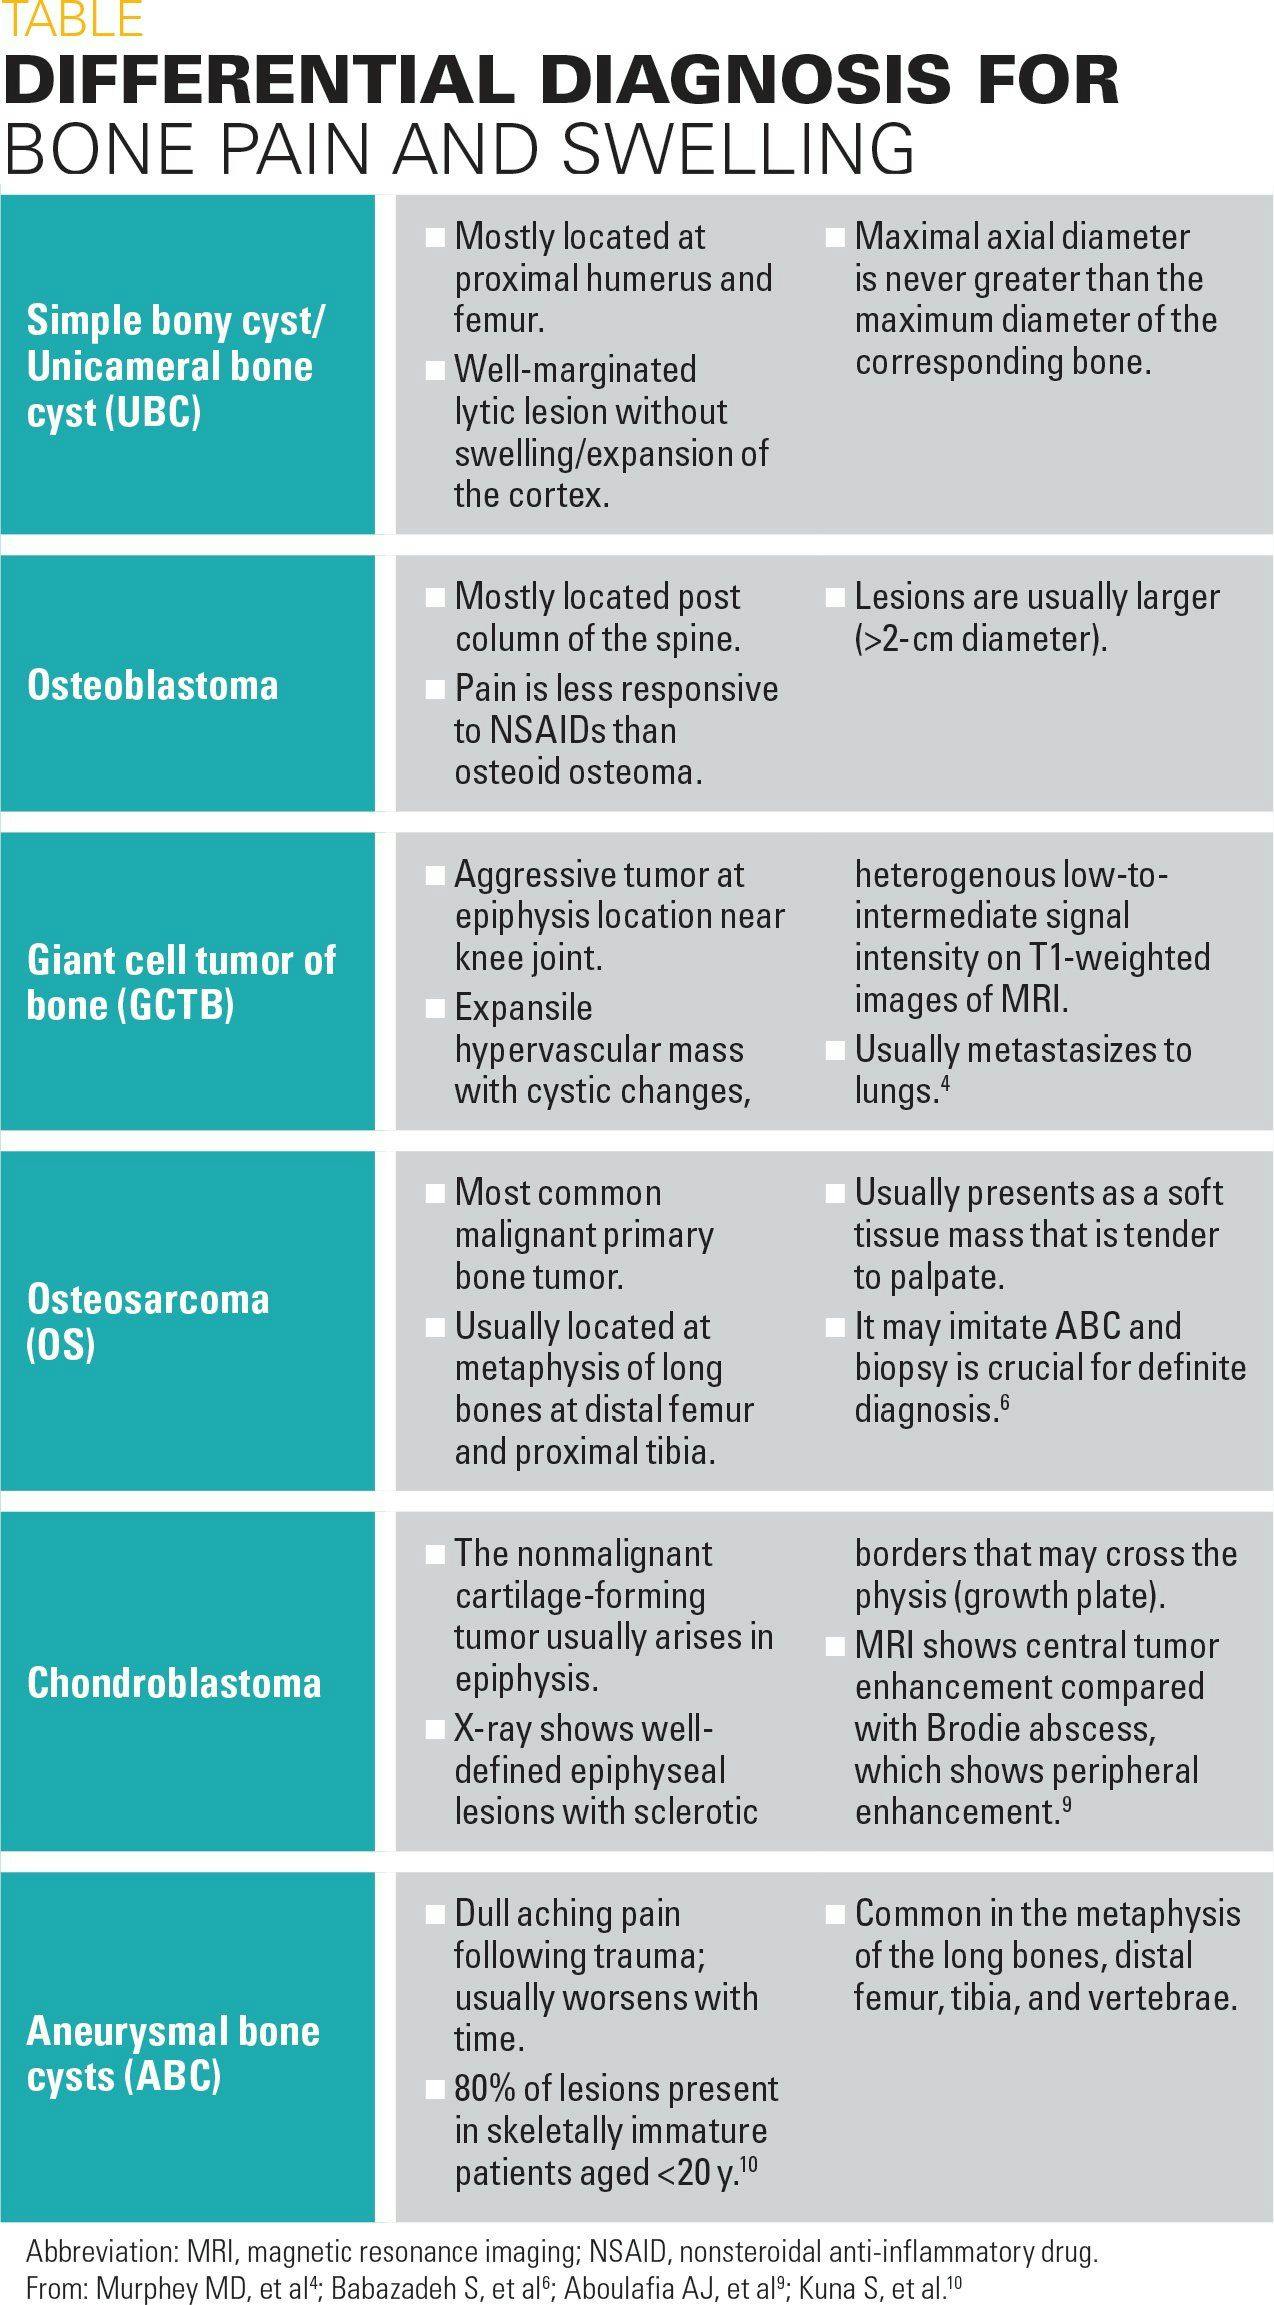 Differential diagnosis for bone pain and swelling